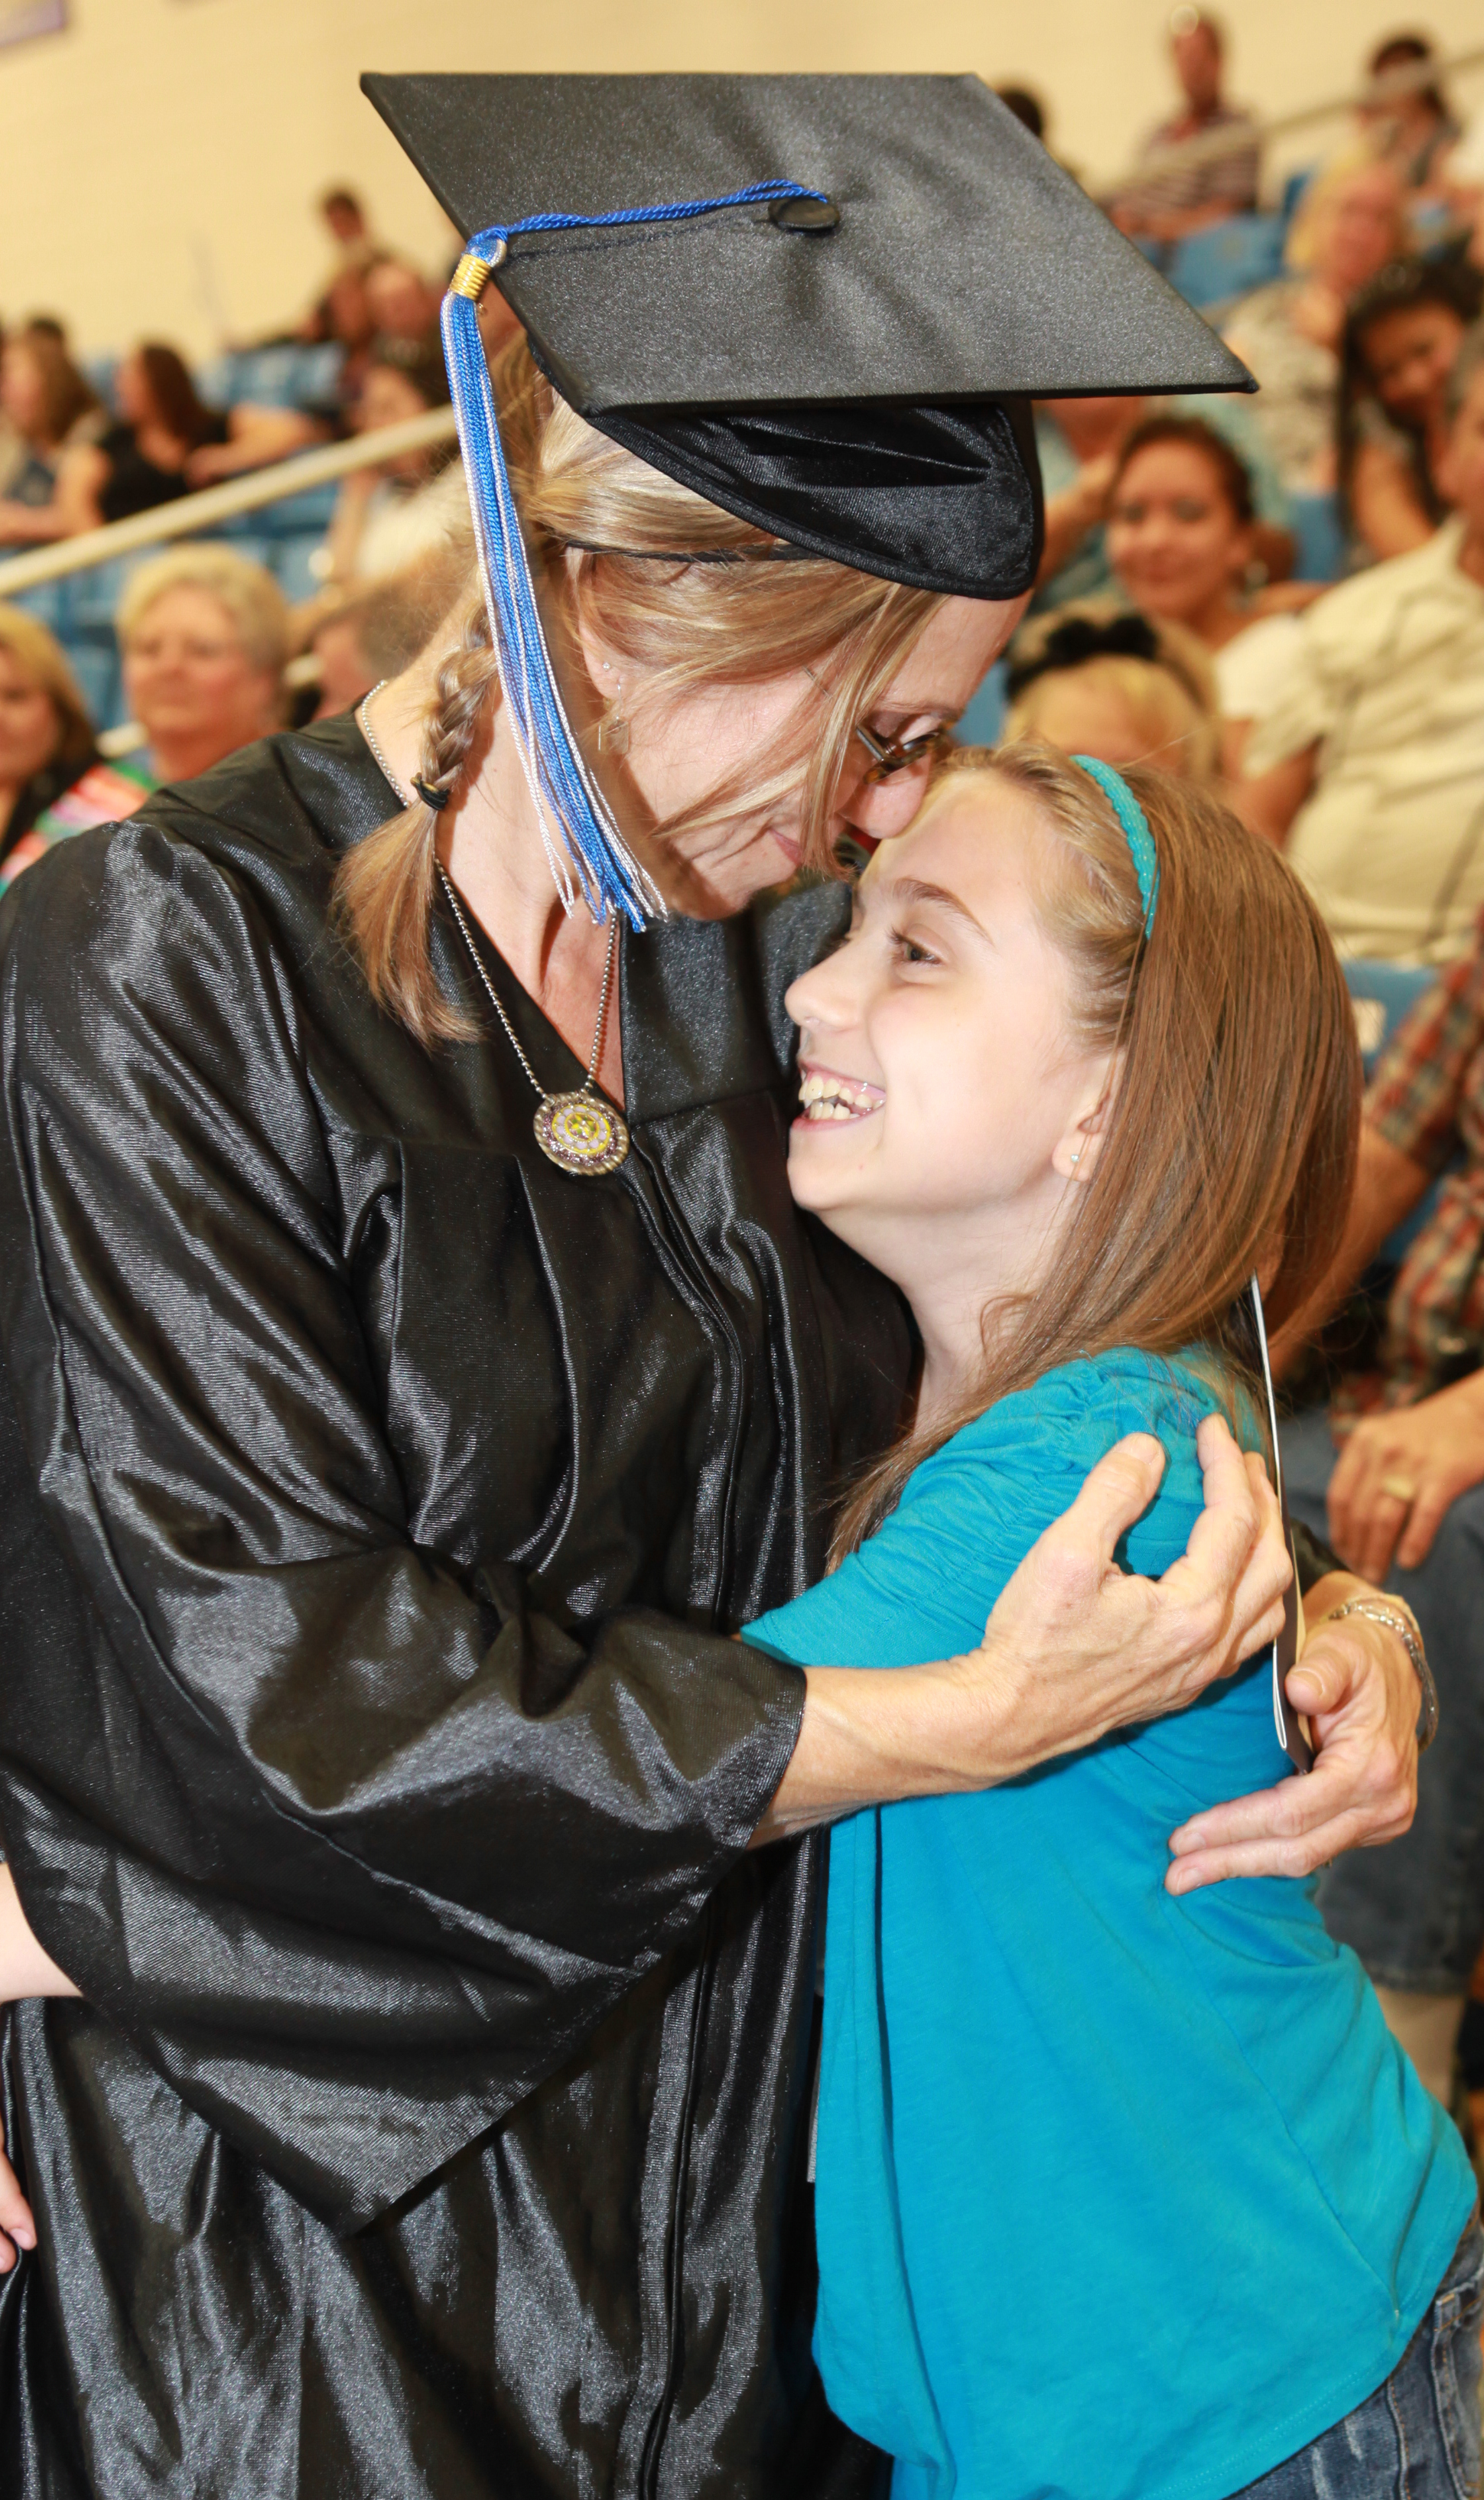 PHOTO: Magda Hiller, 51, received her GED® at the May 15, 2012 Daytona State Adult Education Commencement.